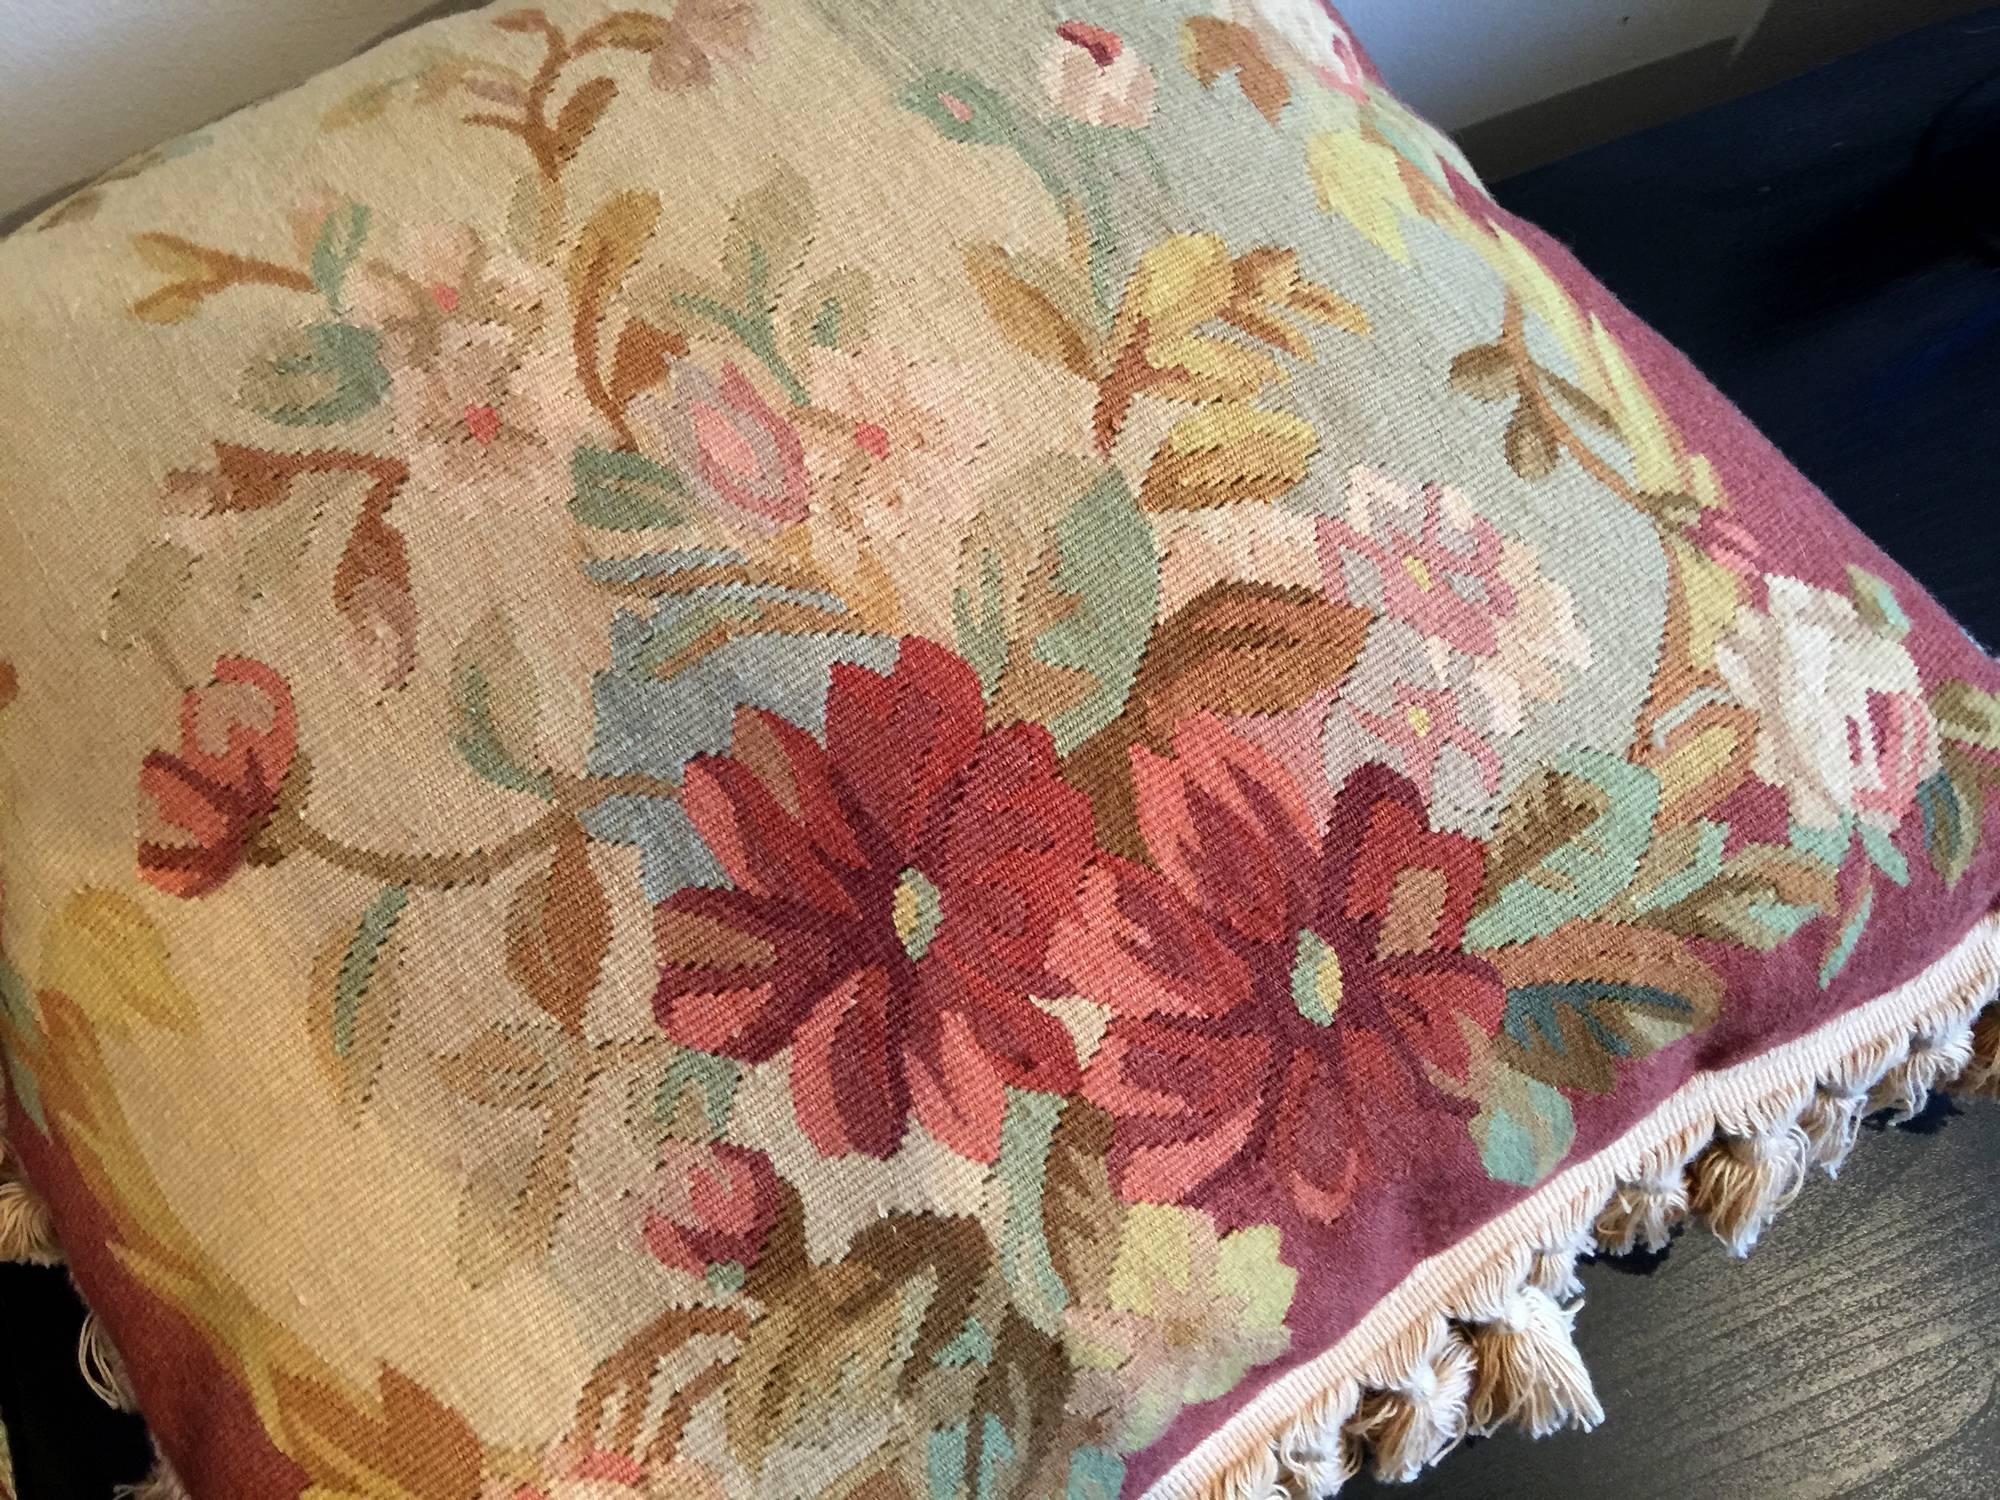 An elegant vintage French silk and wool cushion with antique style floral design.
The cushion colors are consisting of ivory, gold, and pink.